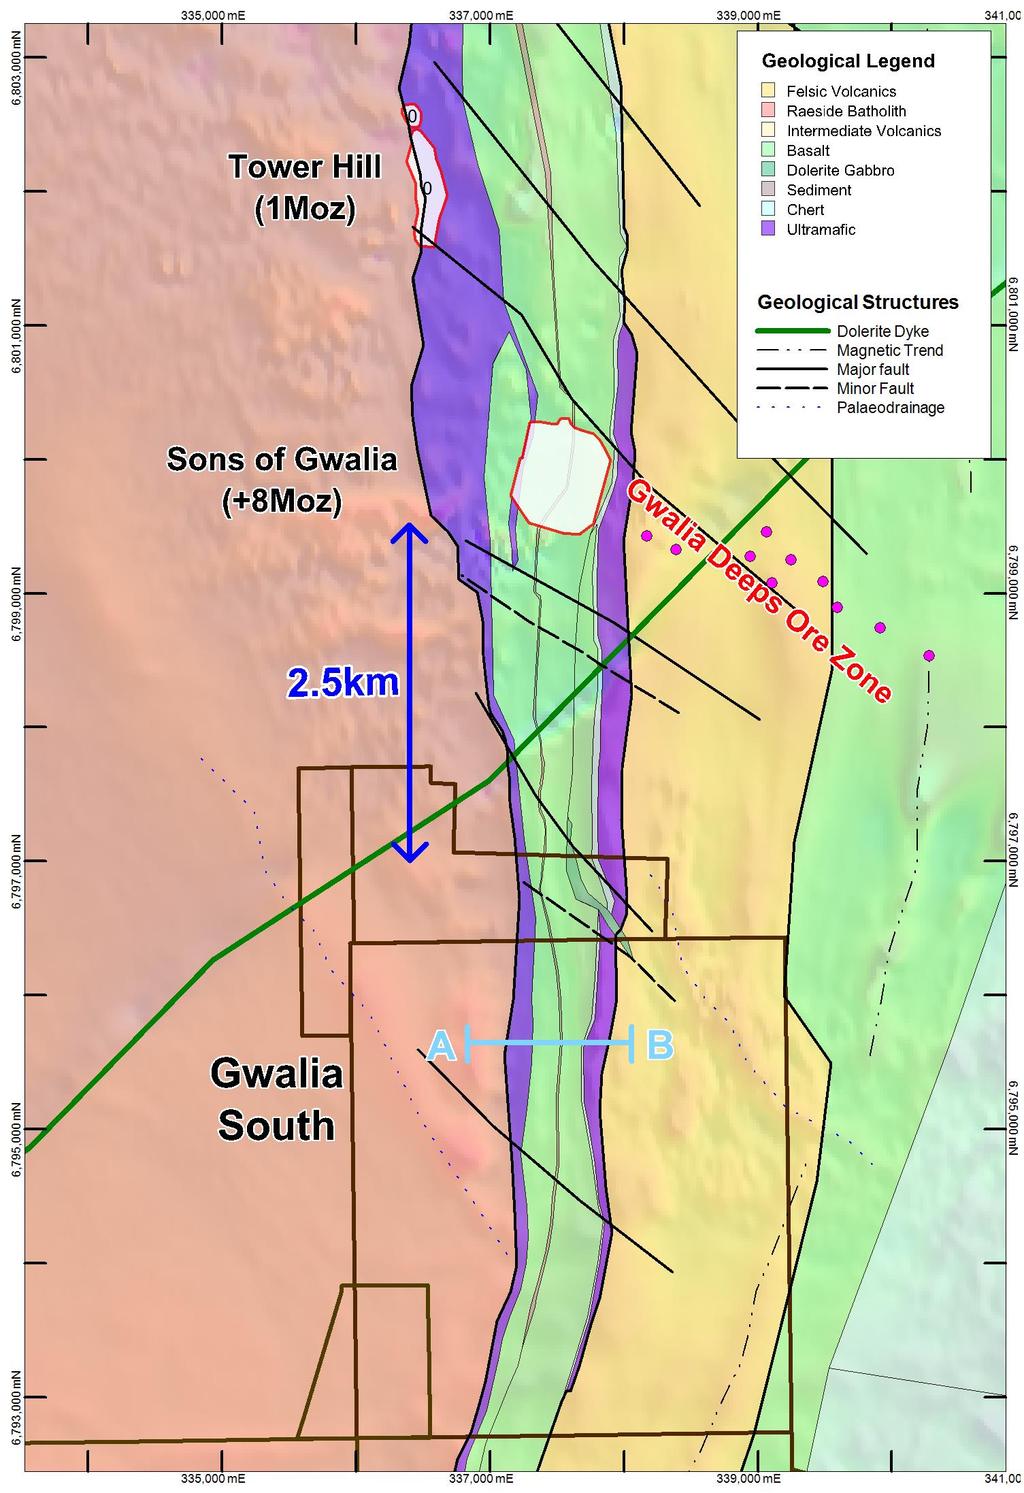 The Gwalia South tenements cover the immediate strike extension of the gold bearing ultramafic and mafic volcanic sequences that host the well-endowed (7Moz) Sons of Gwalia mine (Figure 3).